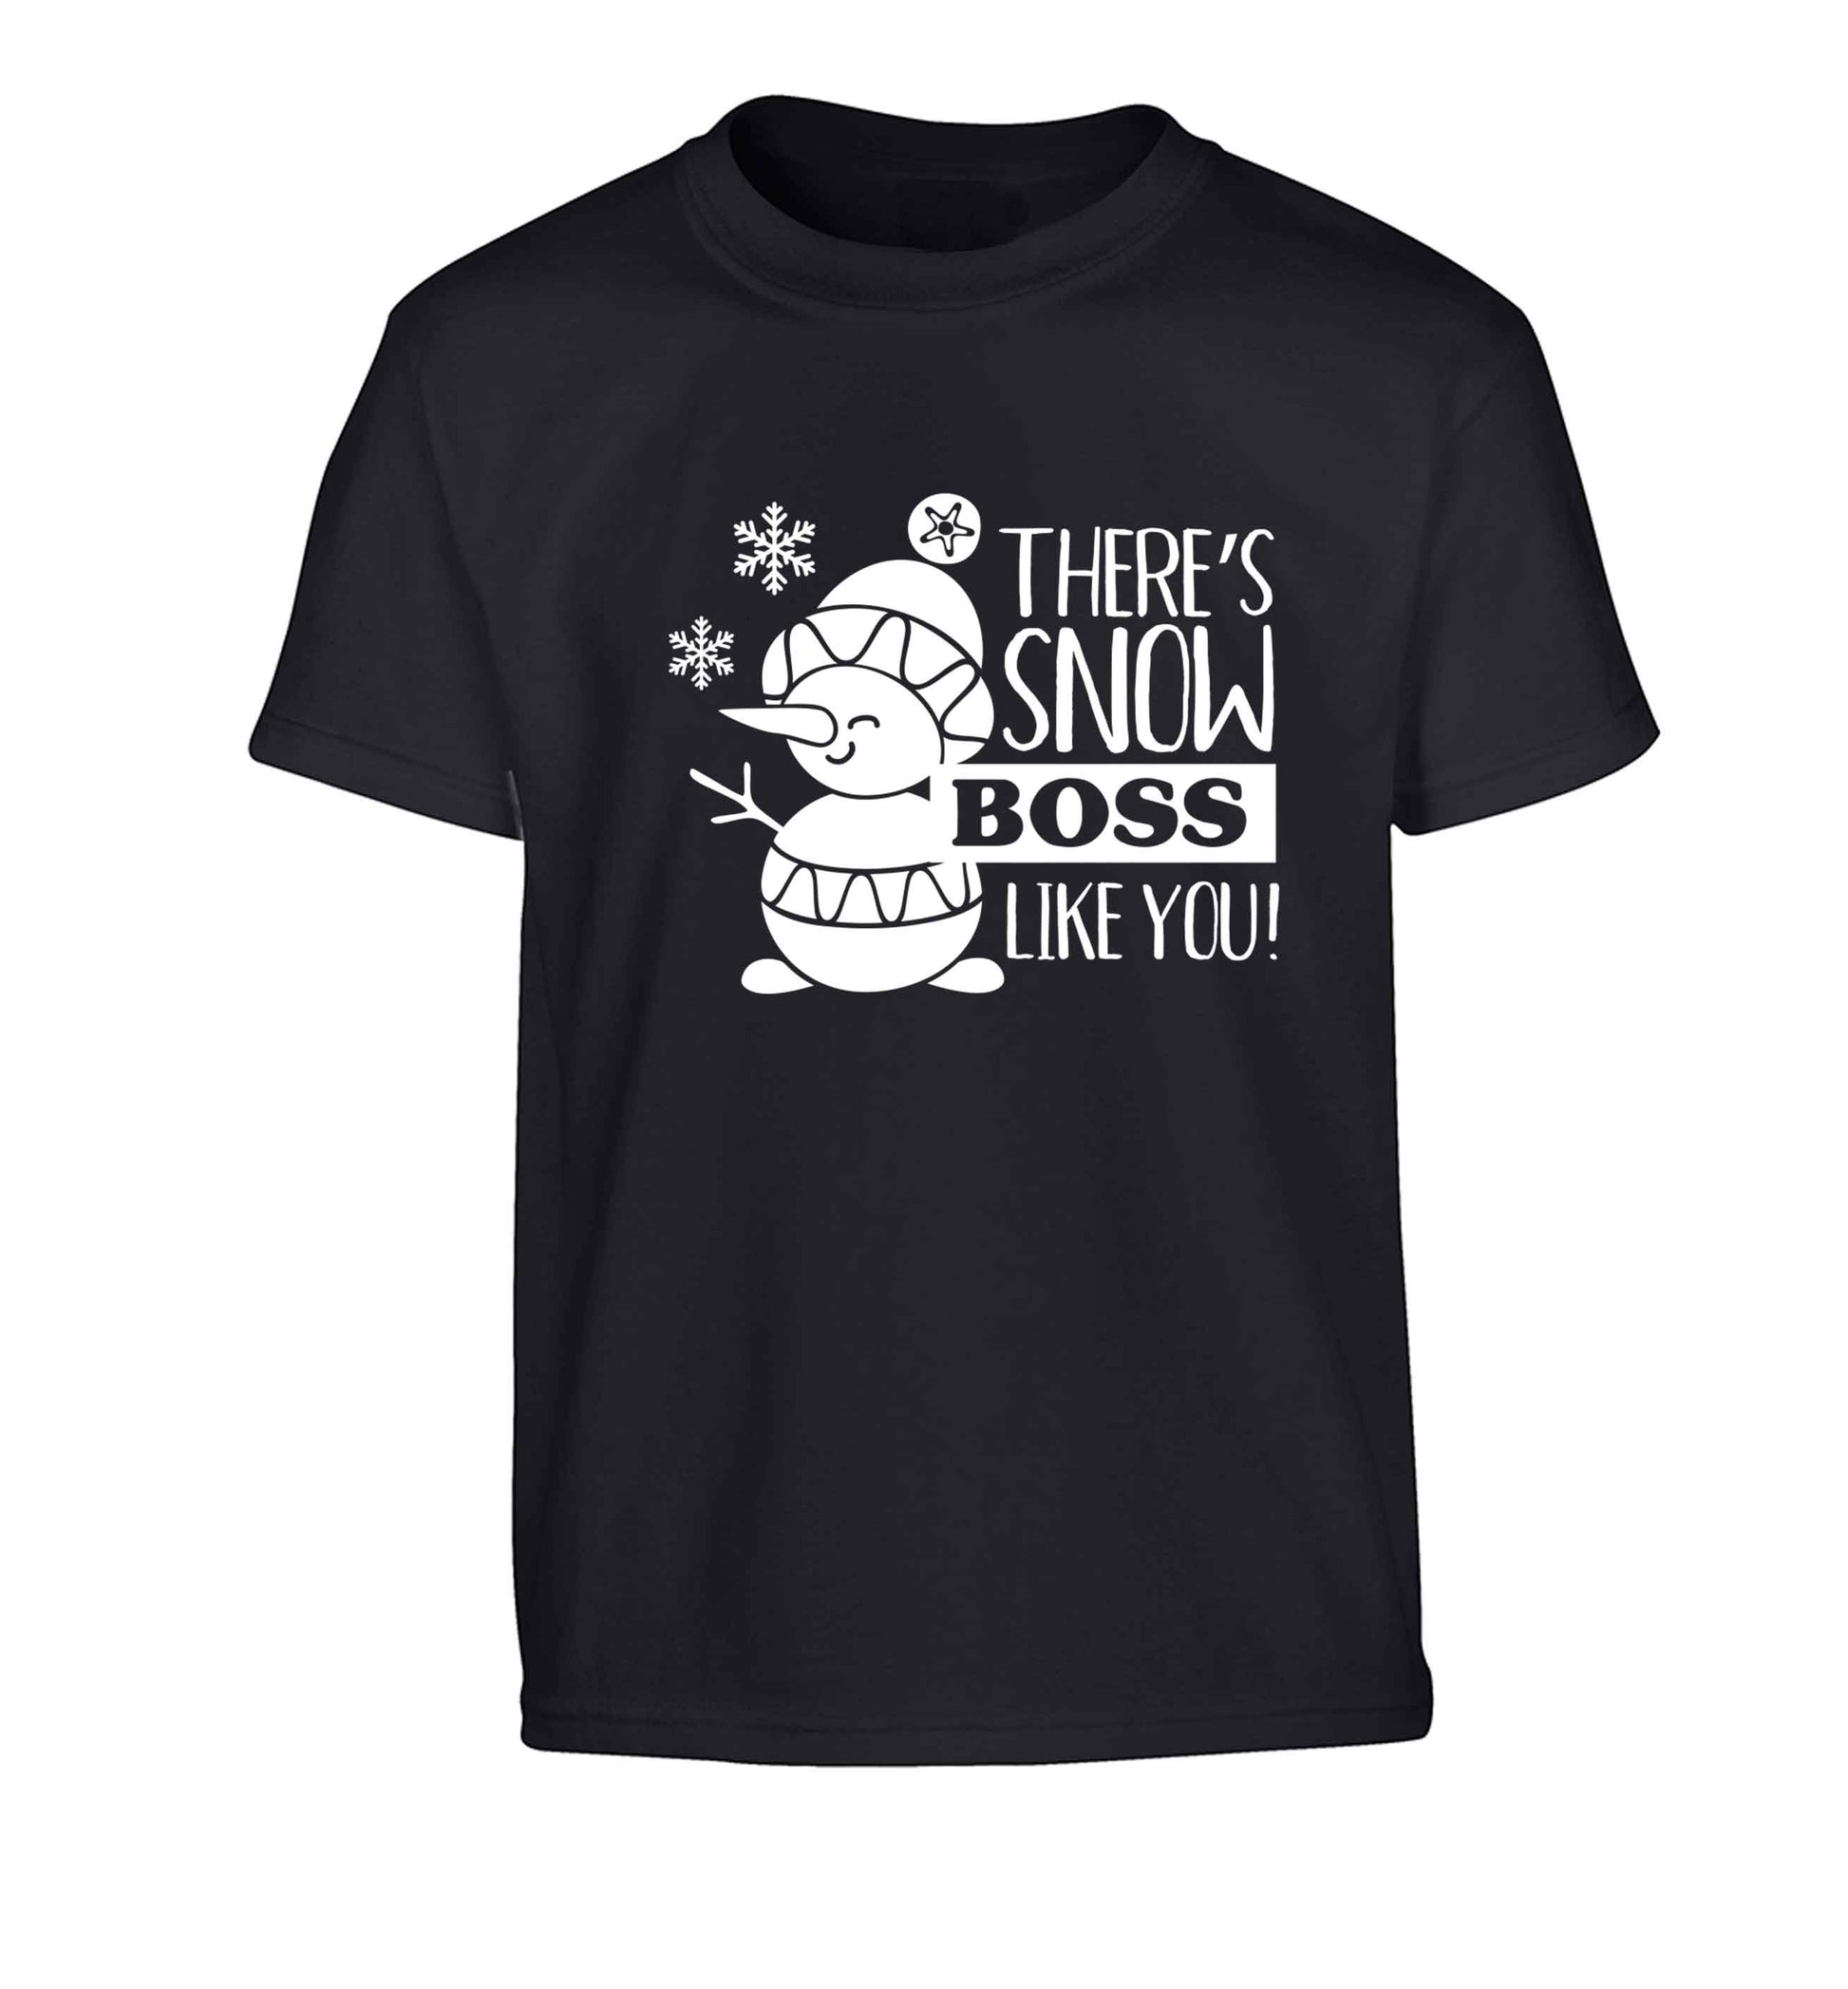 There's snow boss like you Children's black Tshirt 12-13 Years